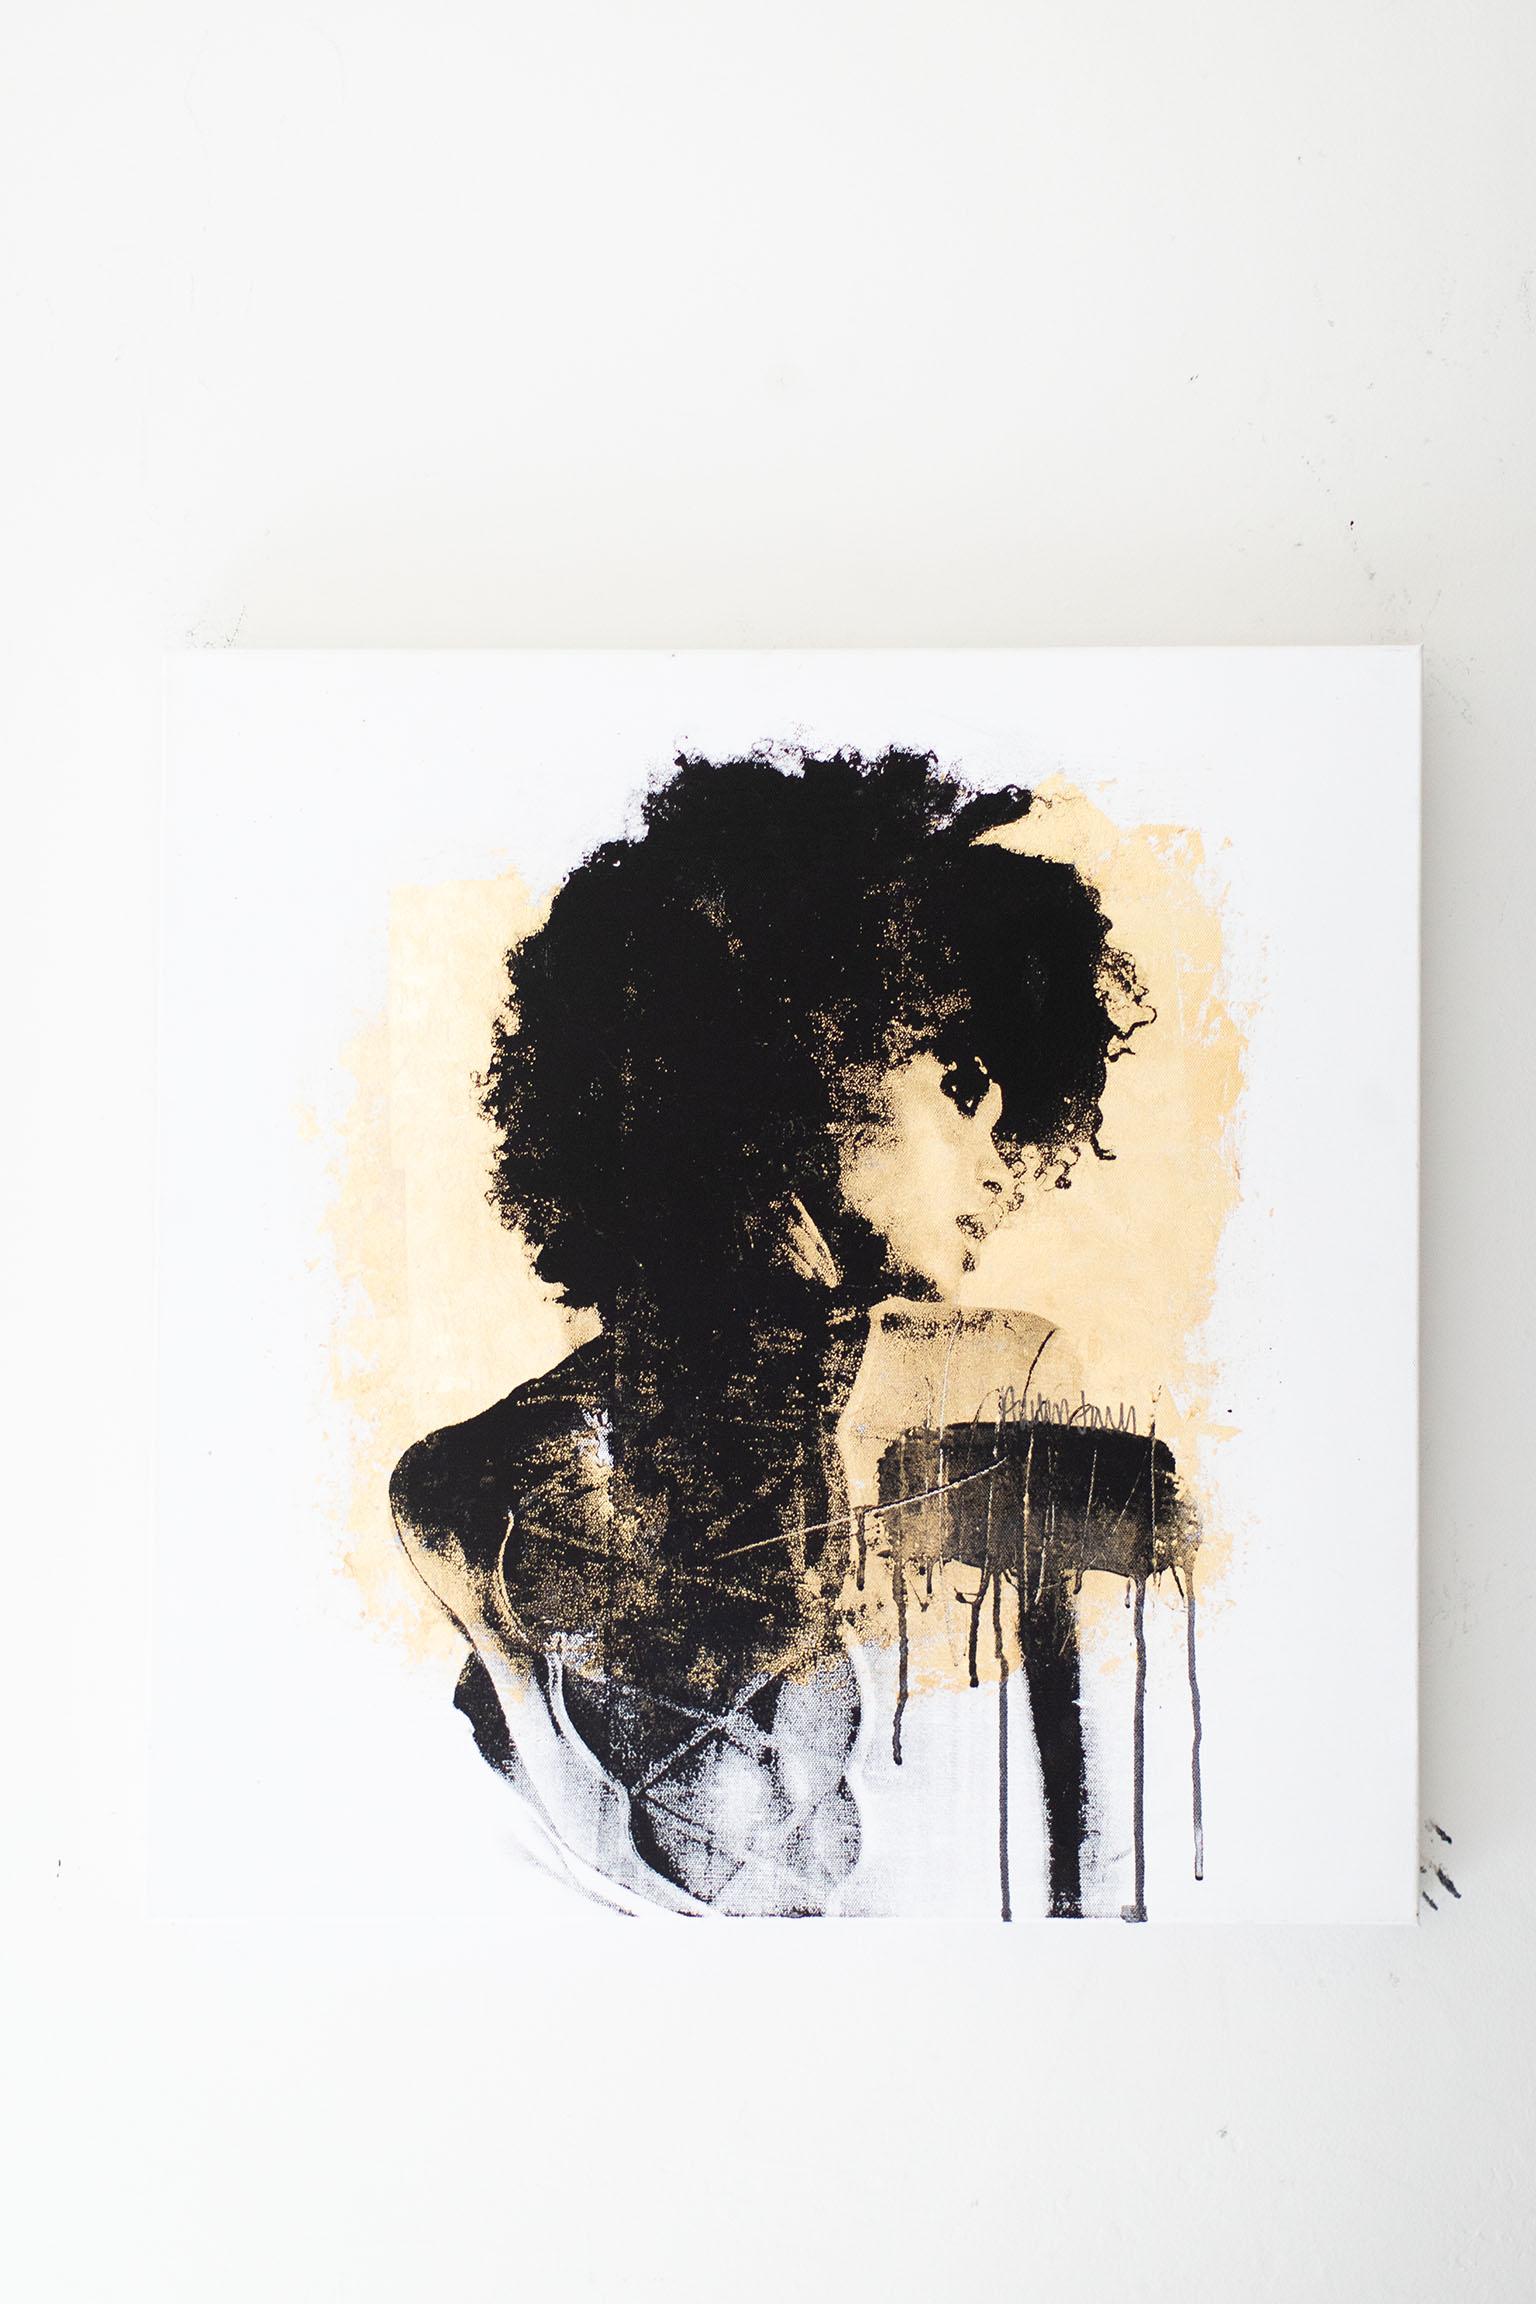 Modern Art, Minimalist Art, Street Art-Shoulder Drip in Trichrome

ABOUT THIS PIECE: 
This minimalist modern street art piece begins as a portrait photograph shot by the artist and evolves into a vibrant and haunting piece using gold leaf on canvas.